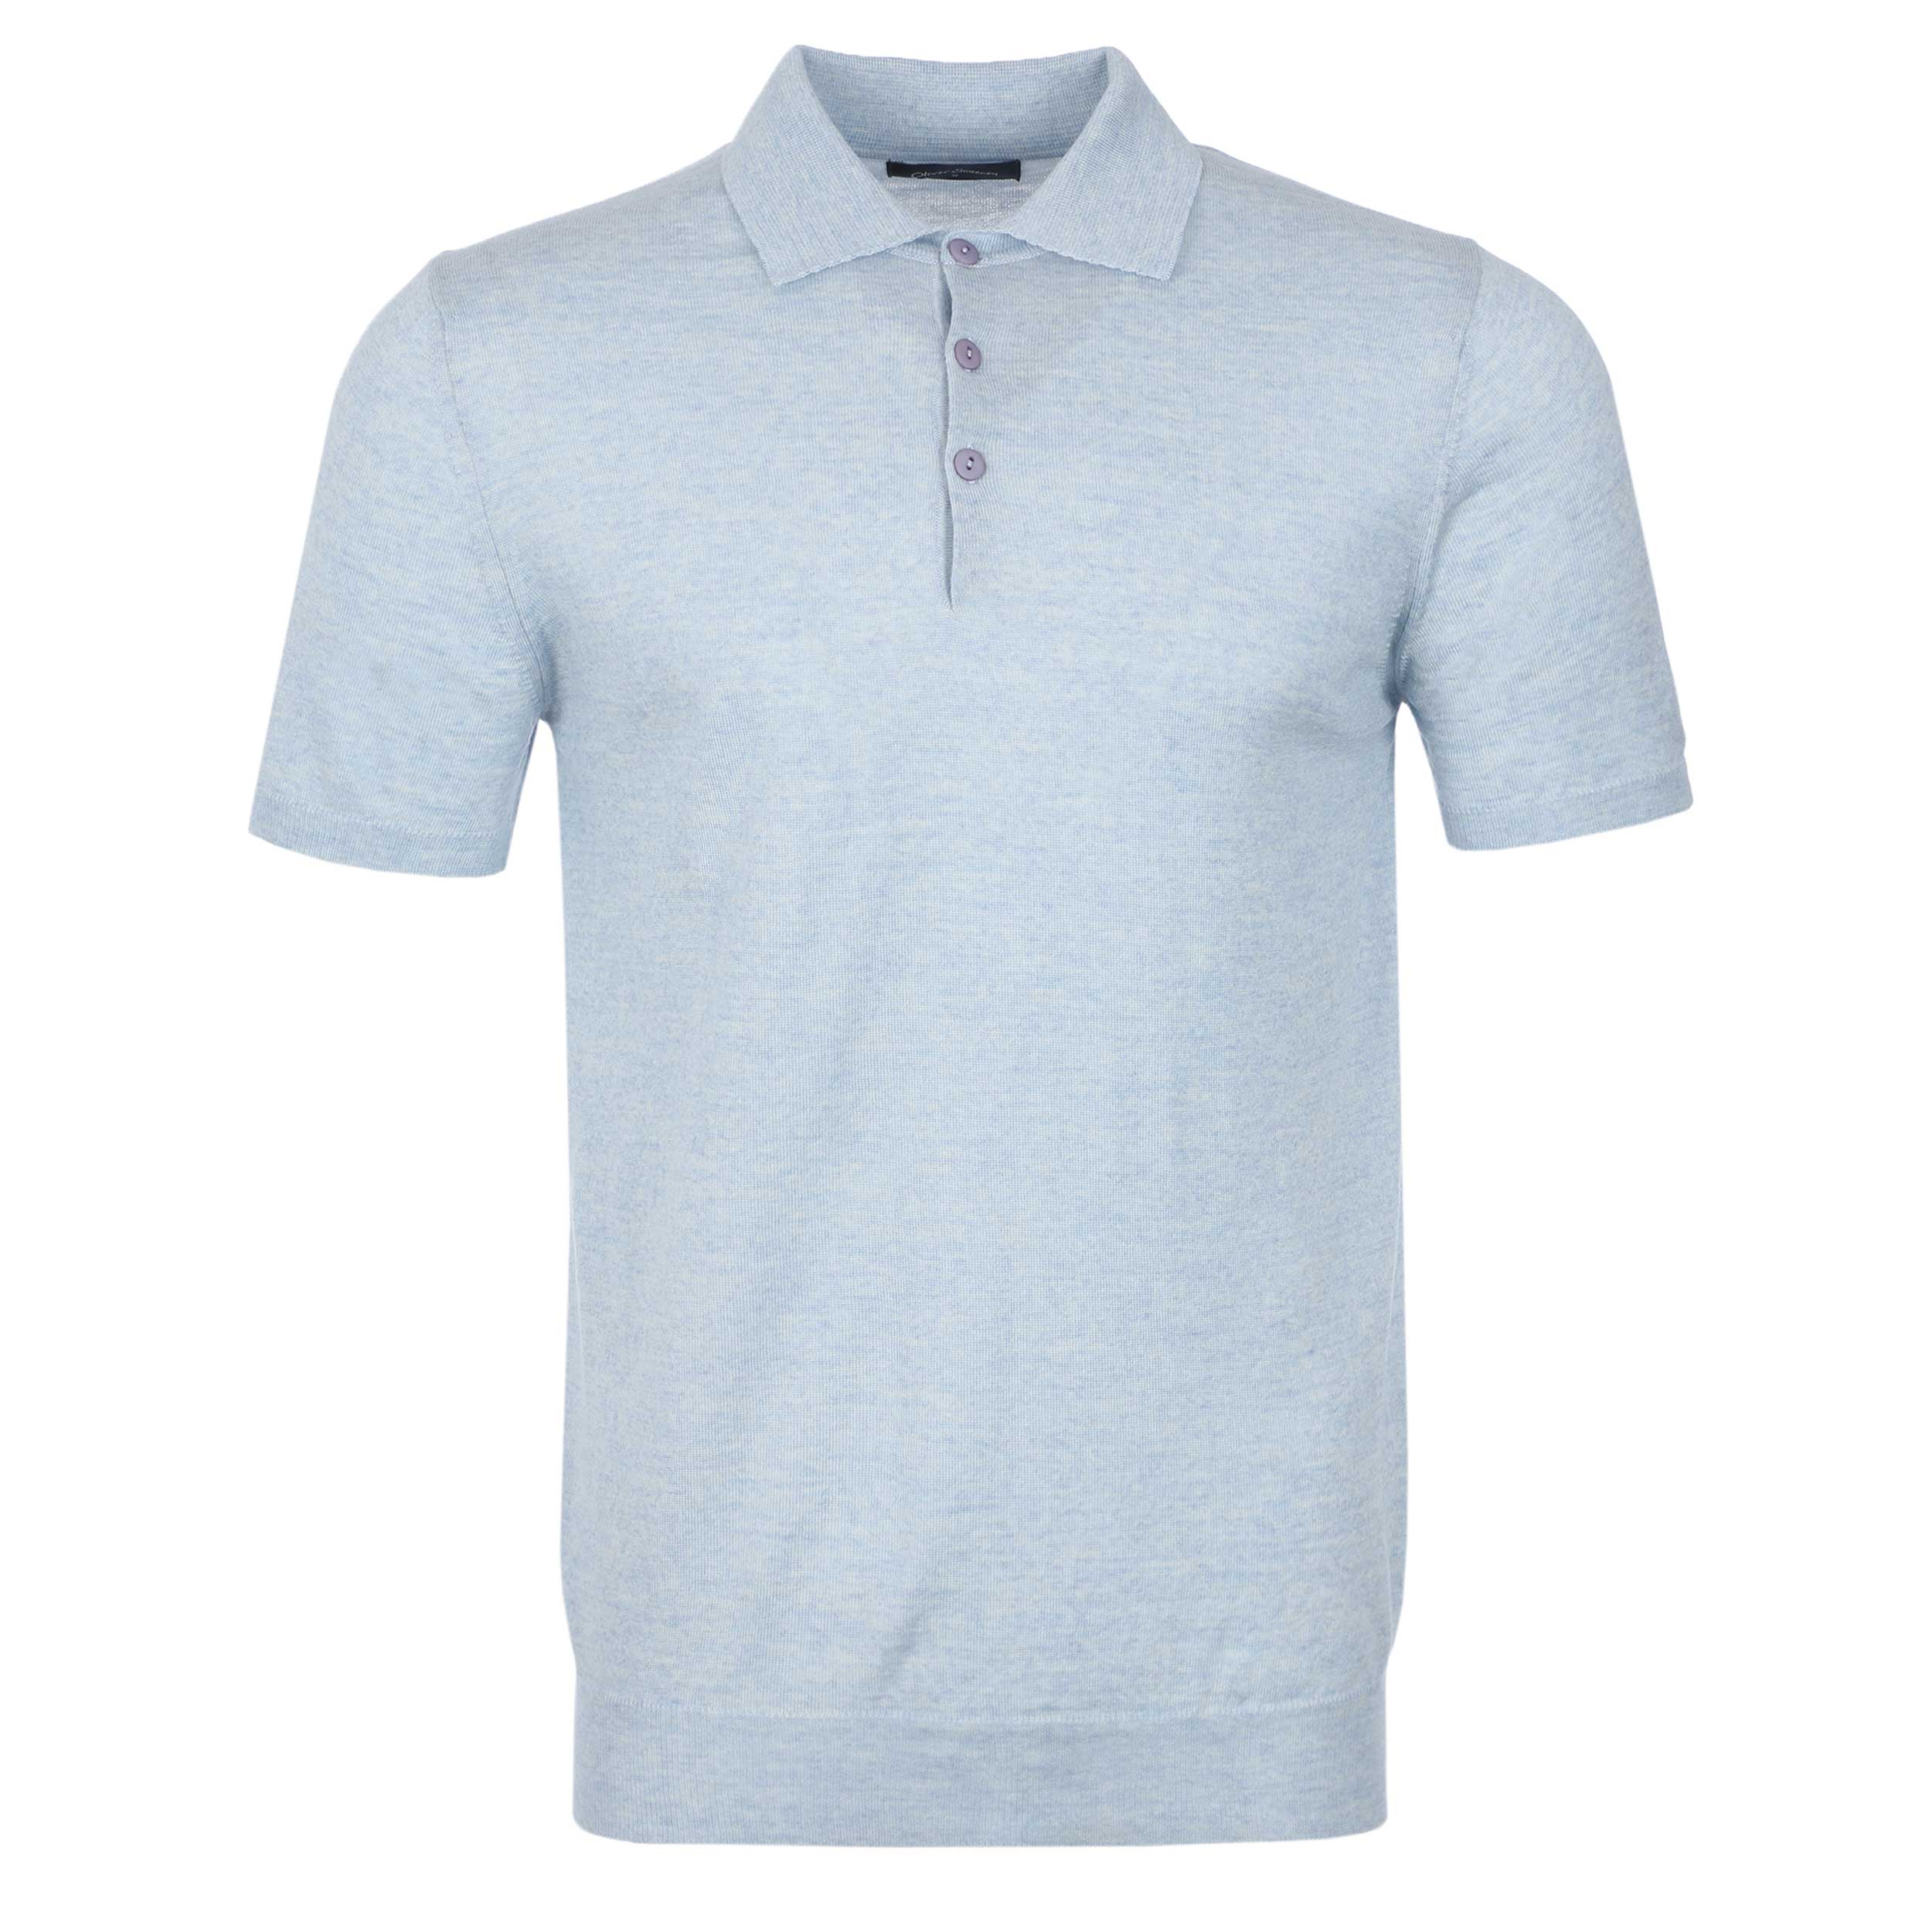 Oliver Sweeney Covehithe Polo Knitwear in Light Blue